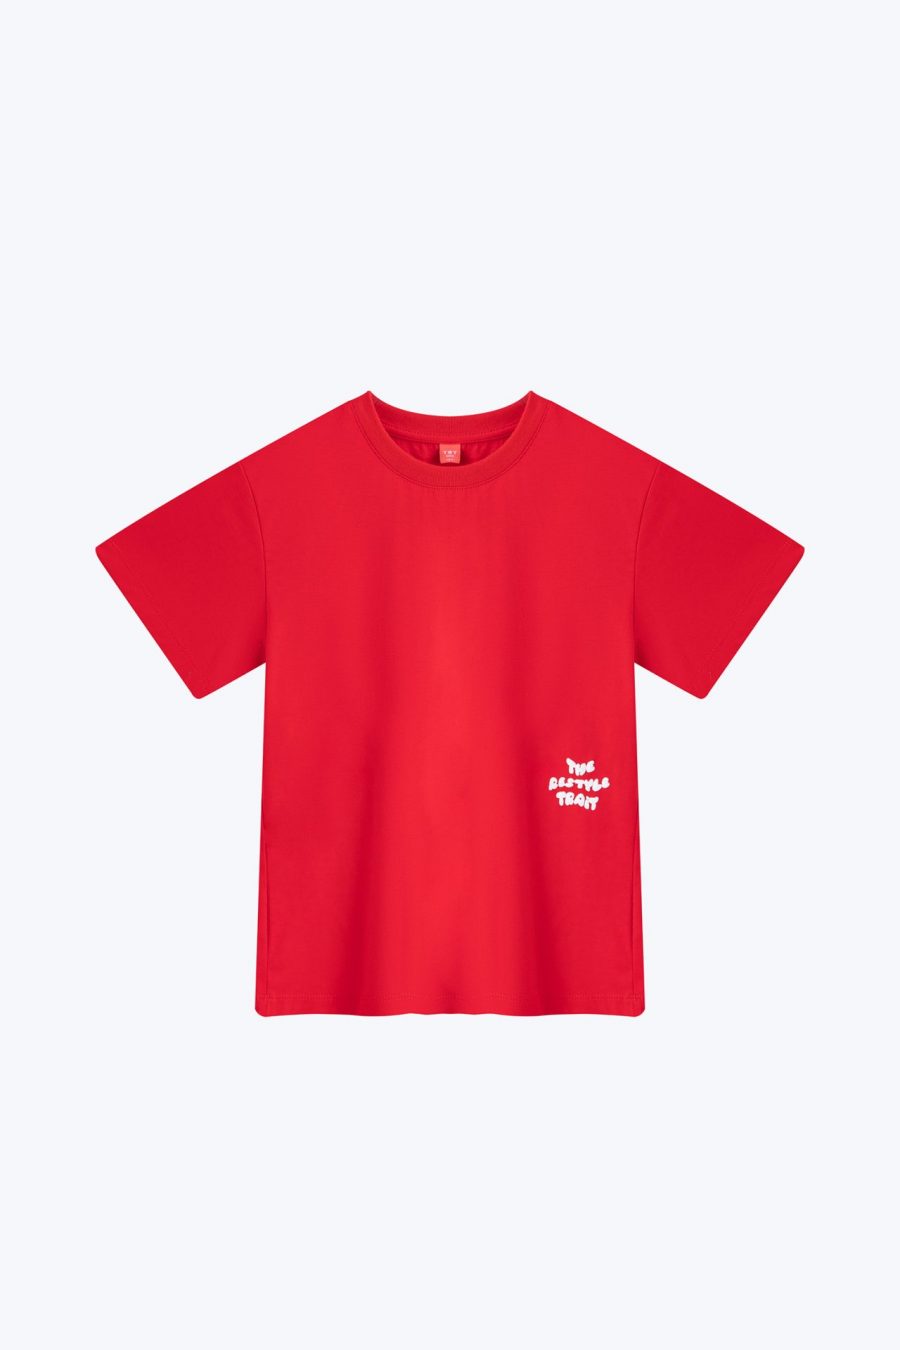 KT800001D Hows your Teh Graphic Tee RED